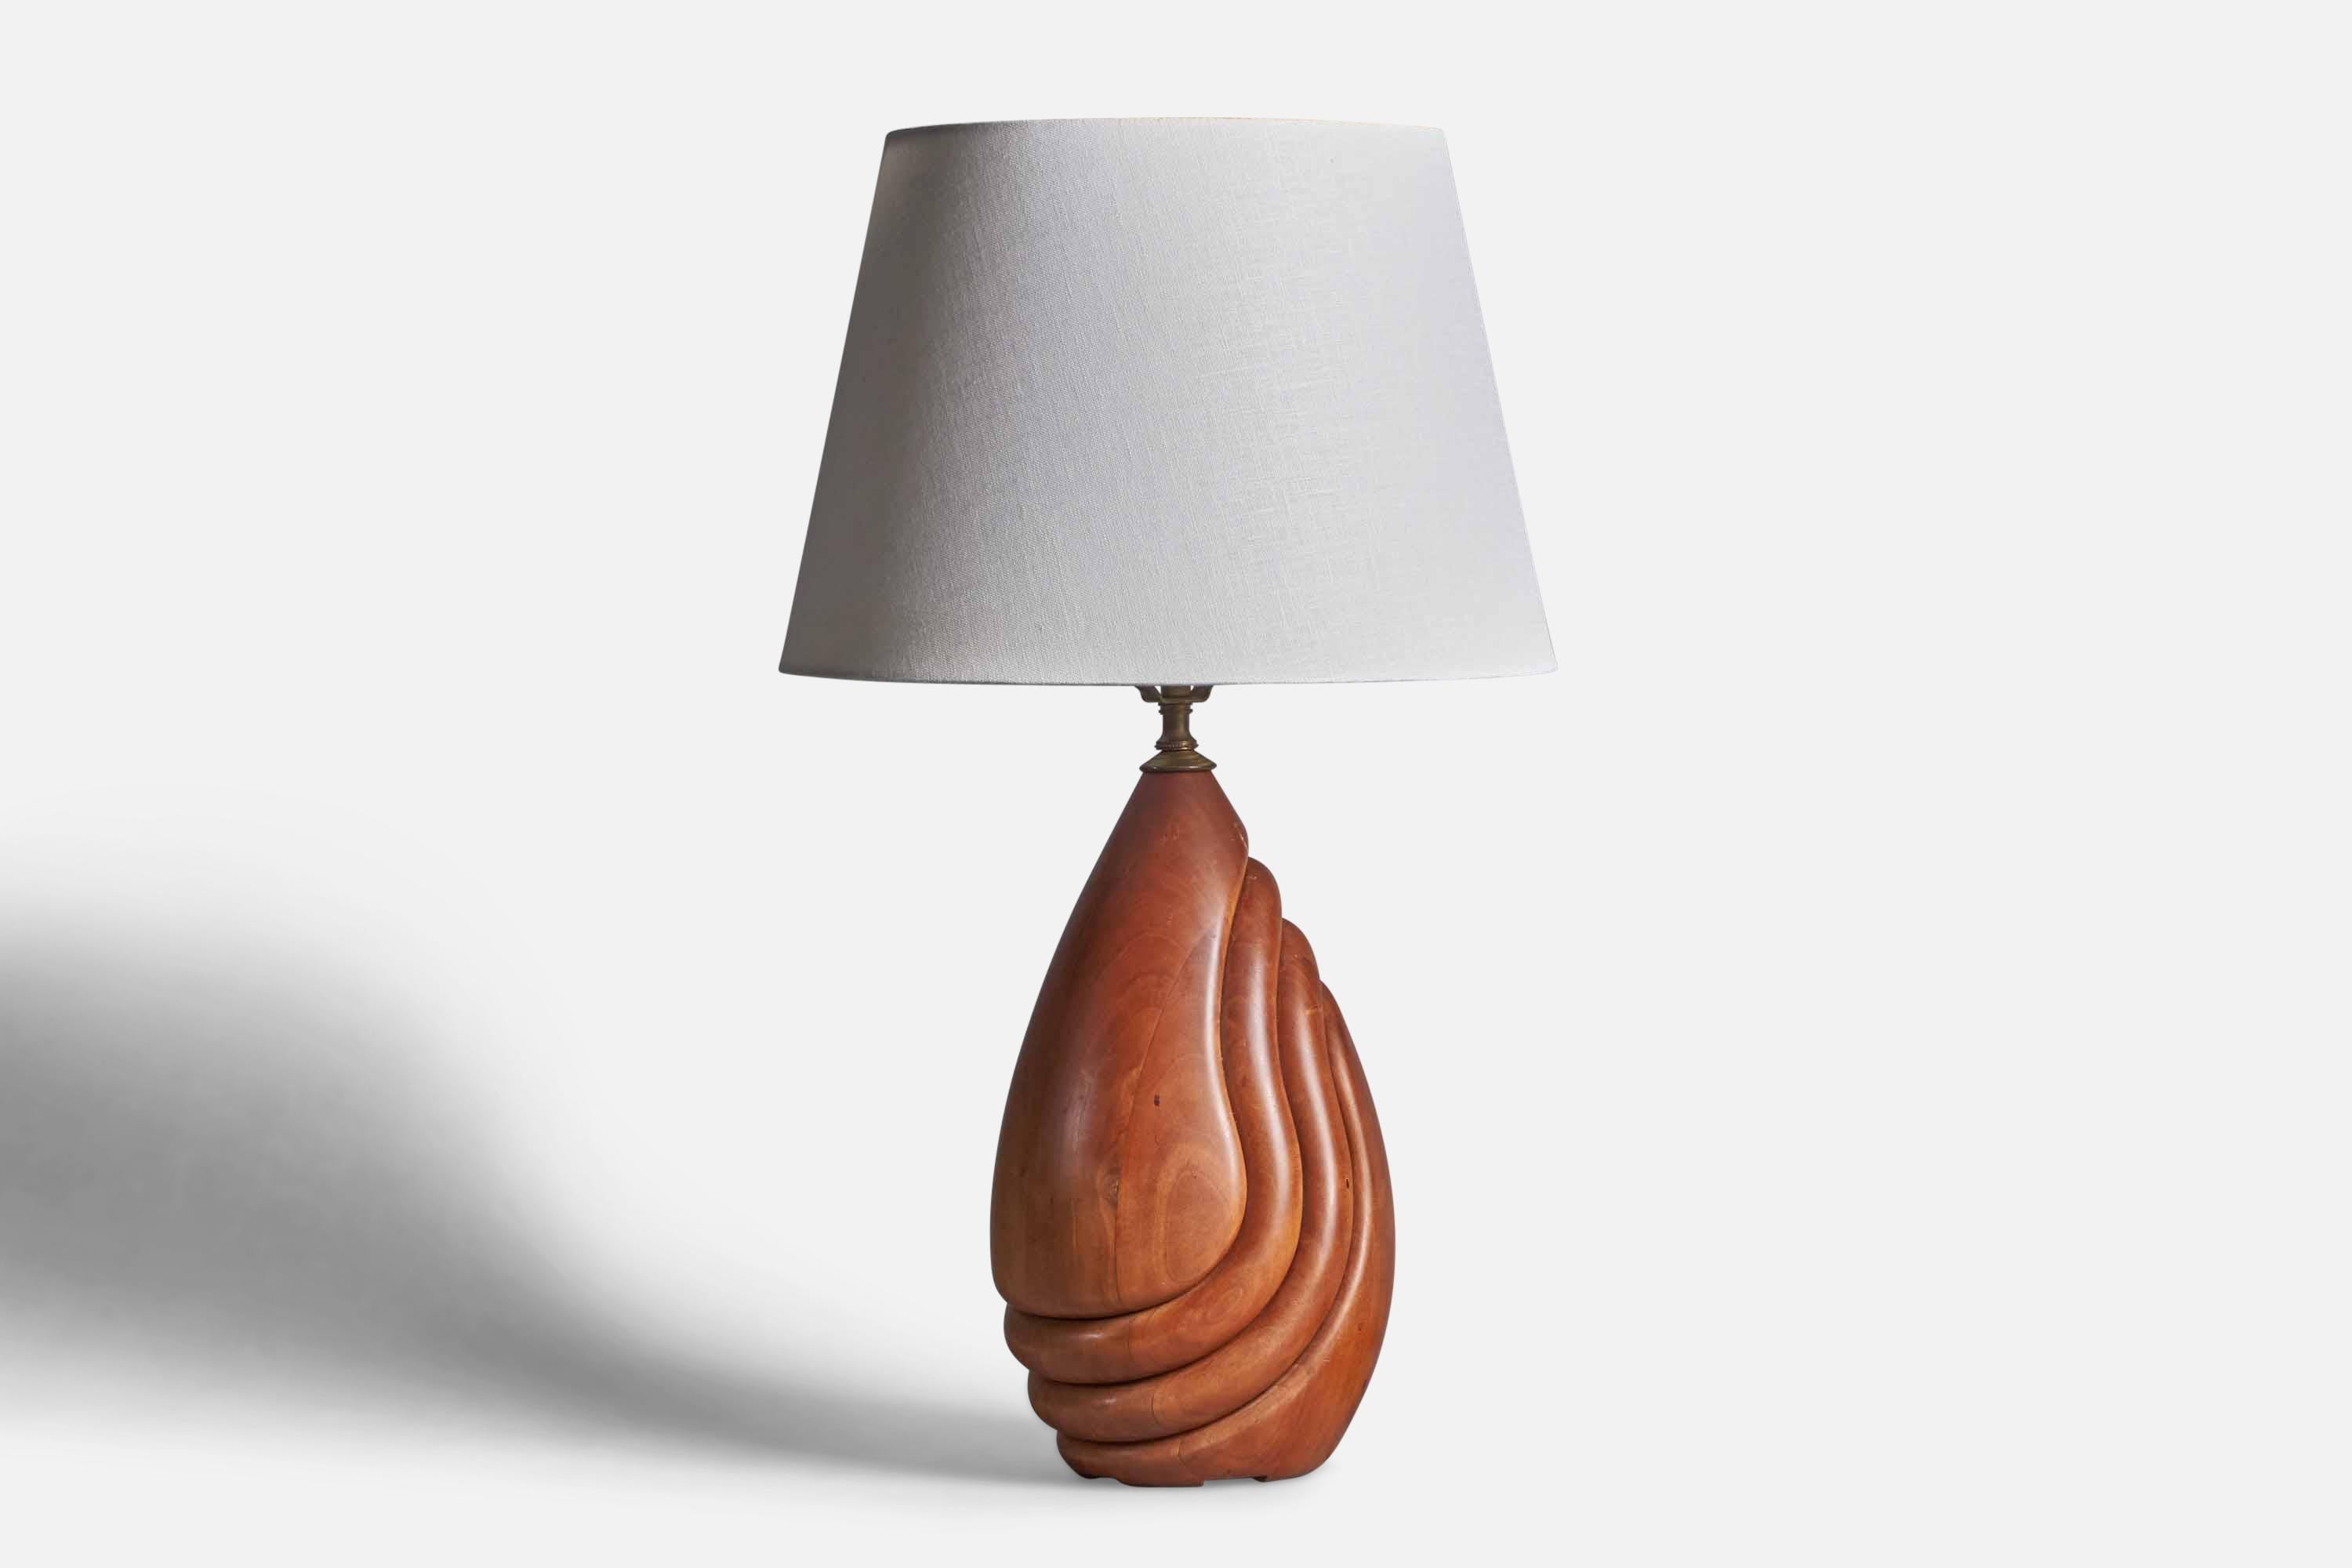 A freeform cherry and brass table lamp designed and produced by Lustig, US, 1980s.

Dimensions of Lamp (inches): 17” H x 7.5” Diameter
Dimensions of Shade (inches): 10